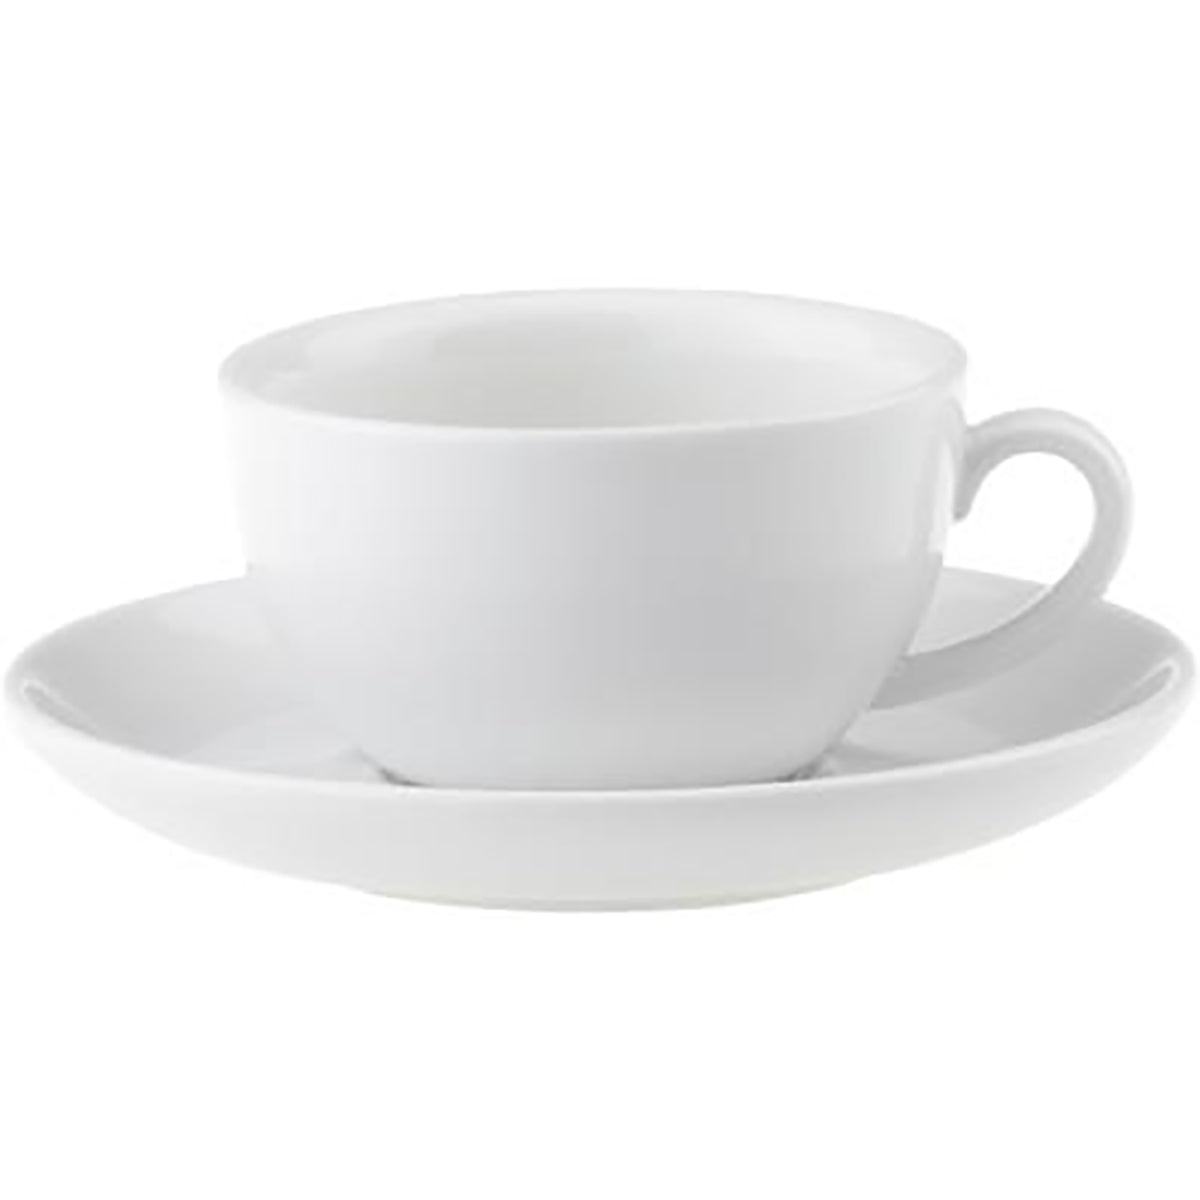 94162 Royal Porcelain Chelsea Cappuccino Cup 0.2Lt For 94163 (0282) Tomkin Australia Hospitality Supplies